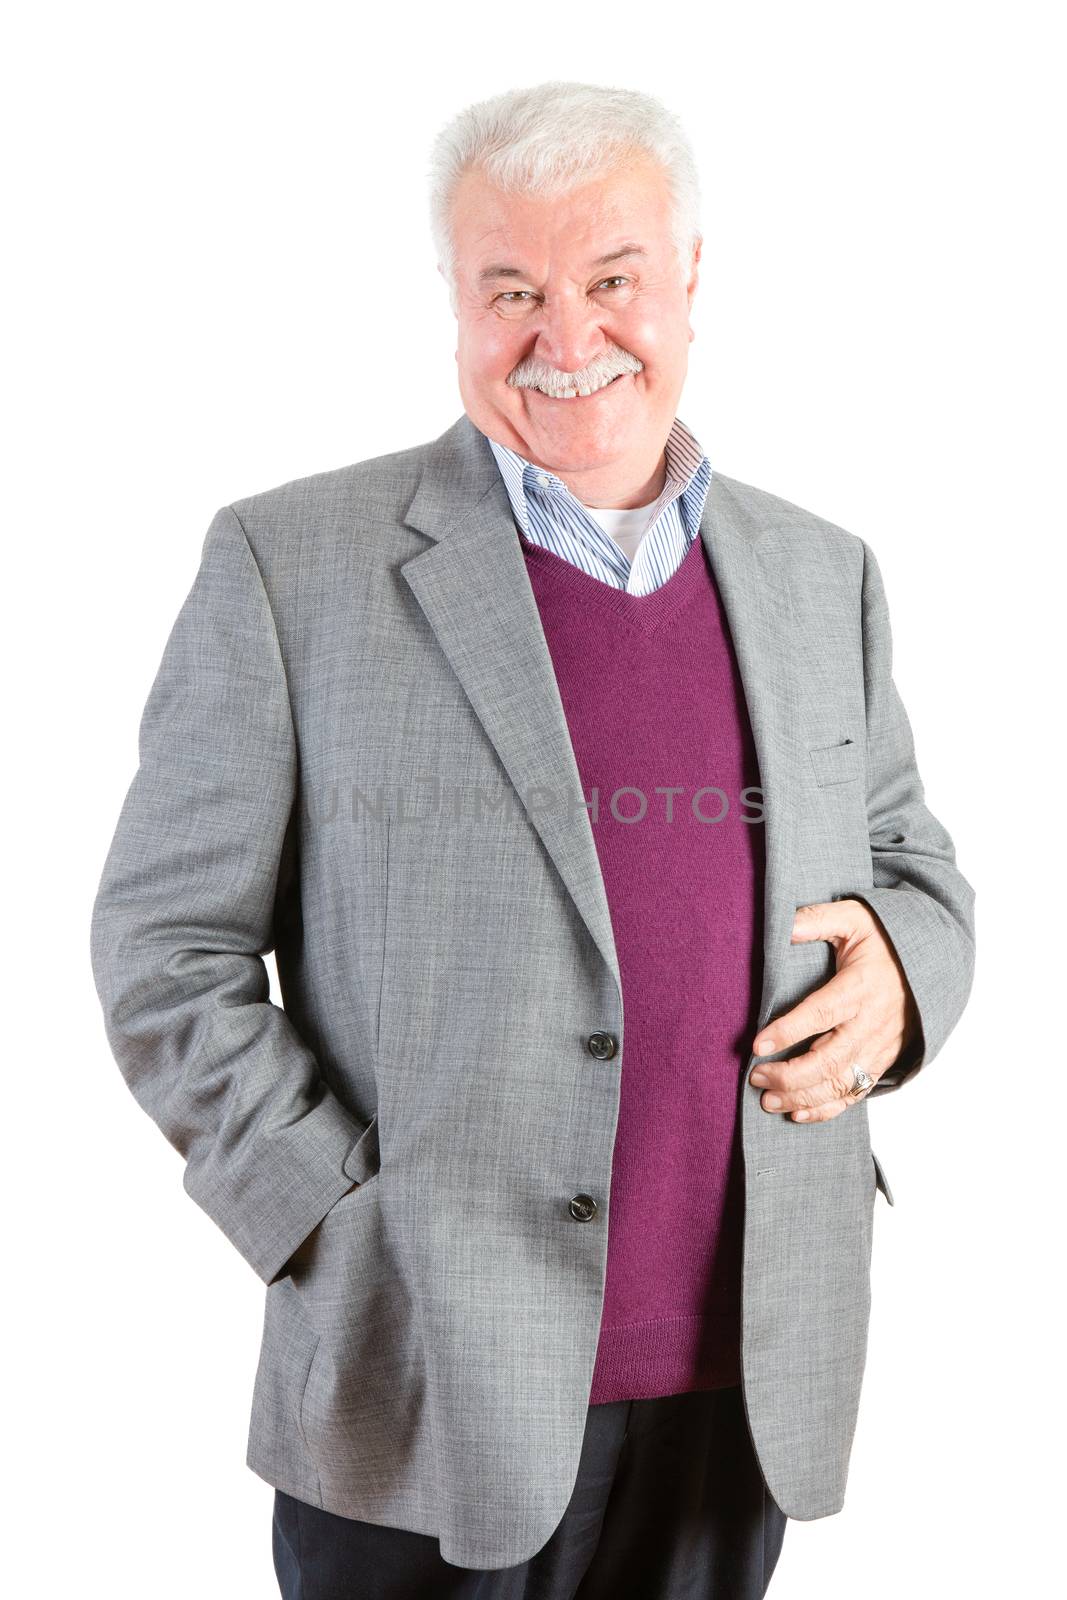 Front View Three Quarter Shot of a Cheerful Senior Businessman Having a Genuine Smile at the Camera Against White Background.